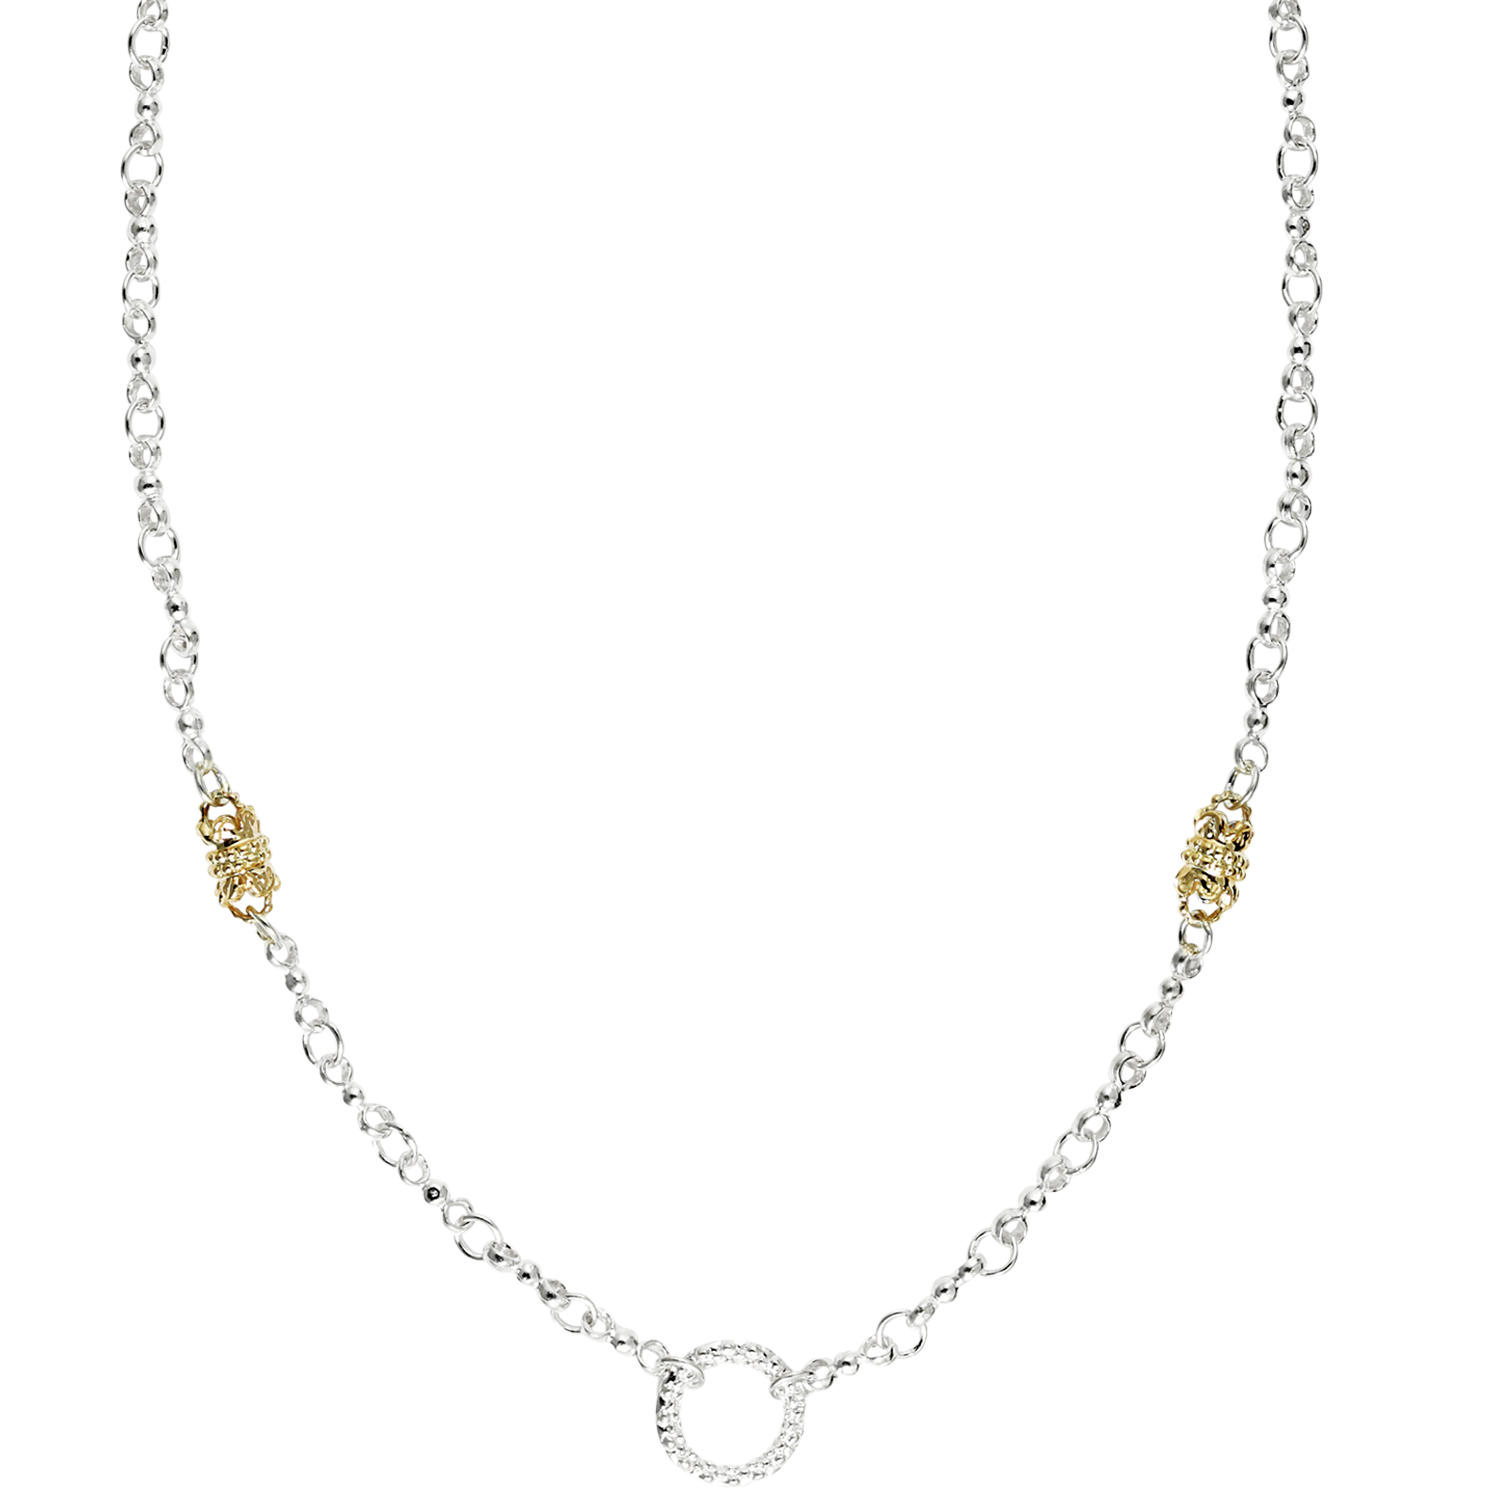 Vahan Sterling Silver & Yellow Gold Necklace Galloway and Moseley, Inc. Sumter, SC